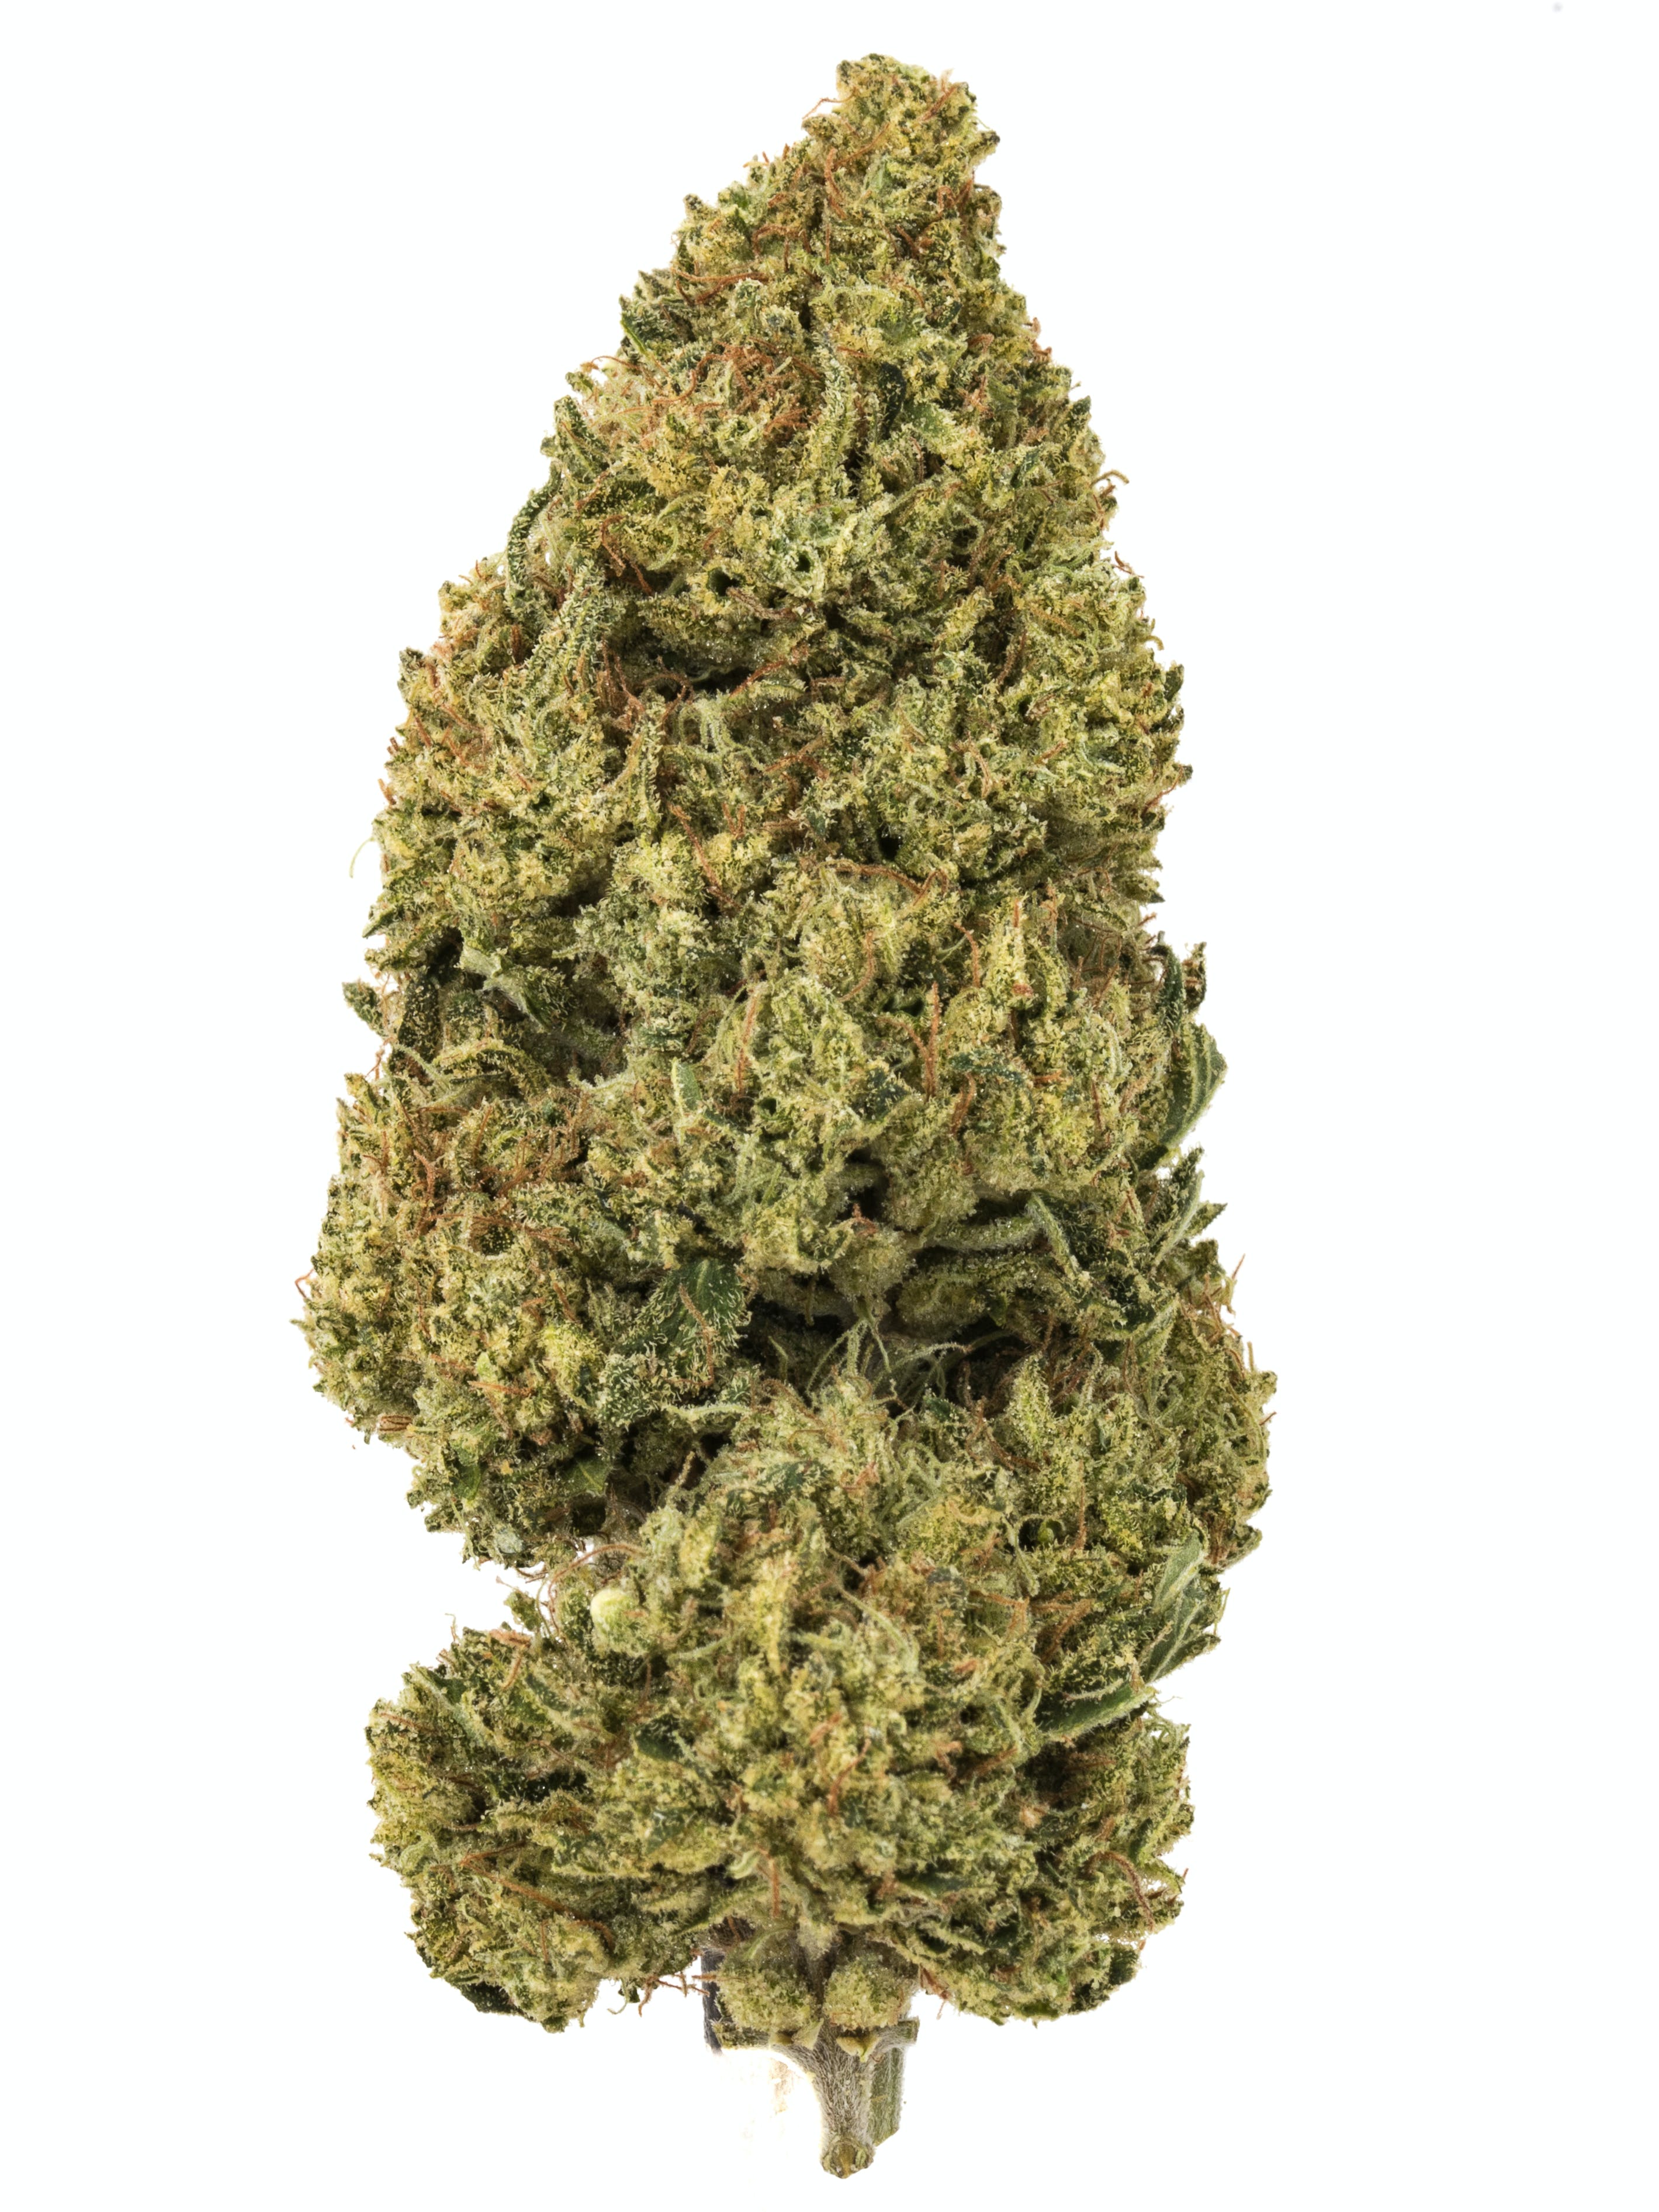 Chemdawg - Chemdawg Weed for Sale